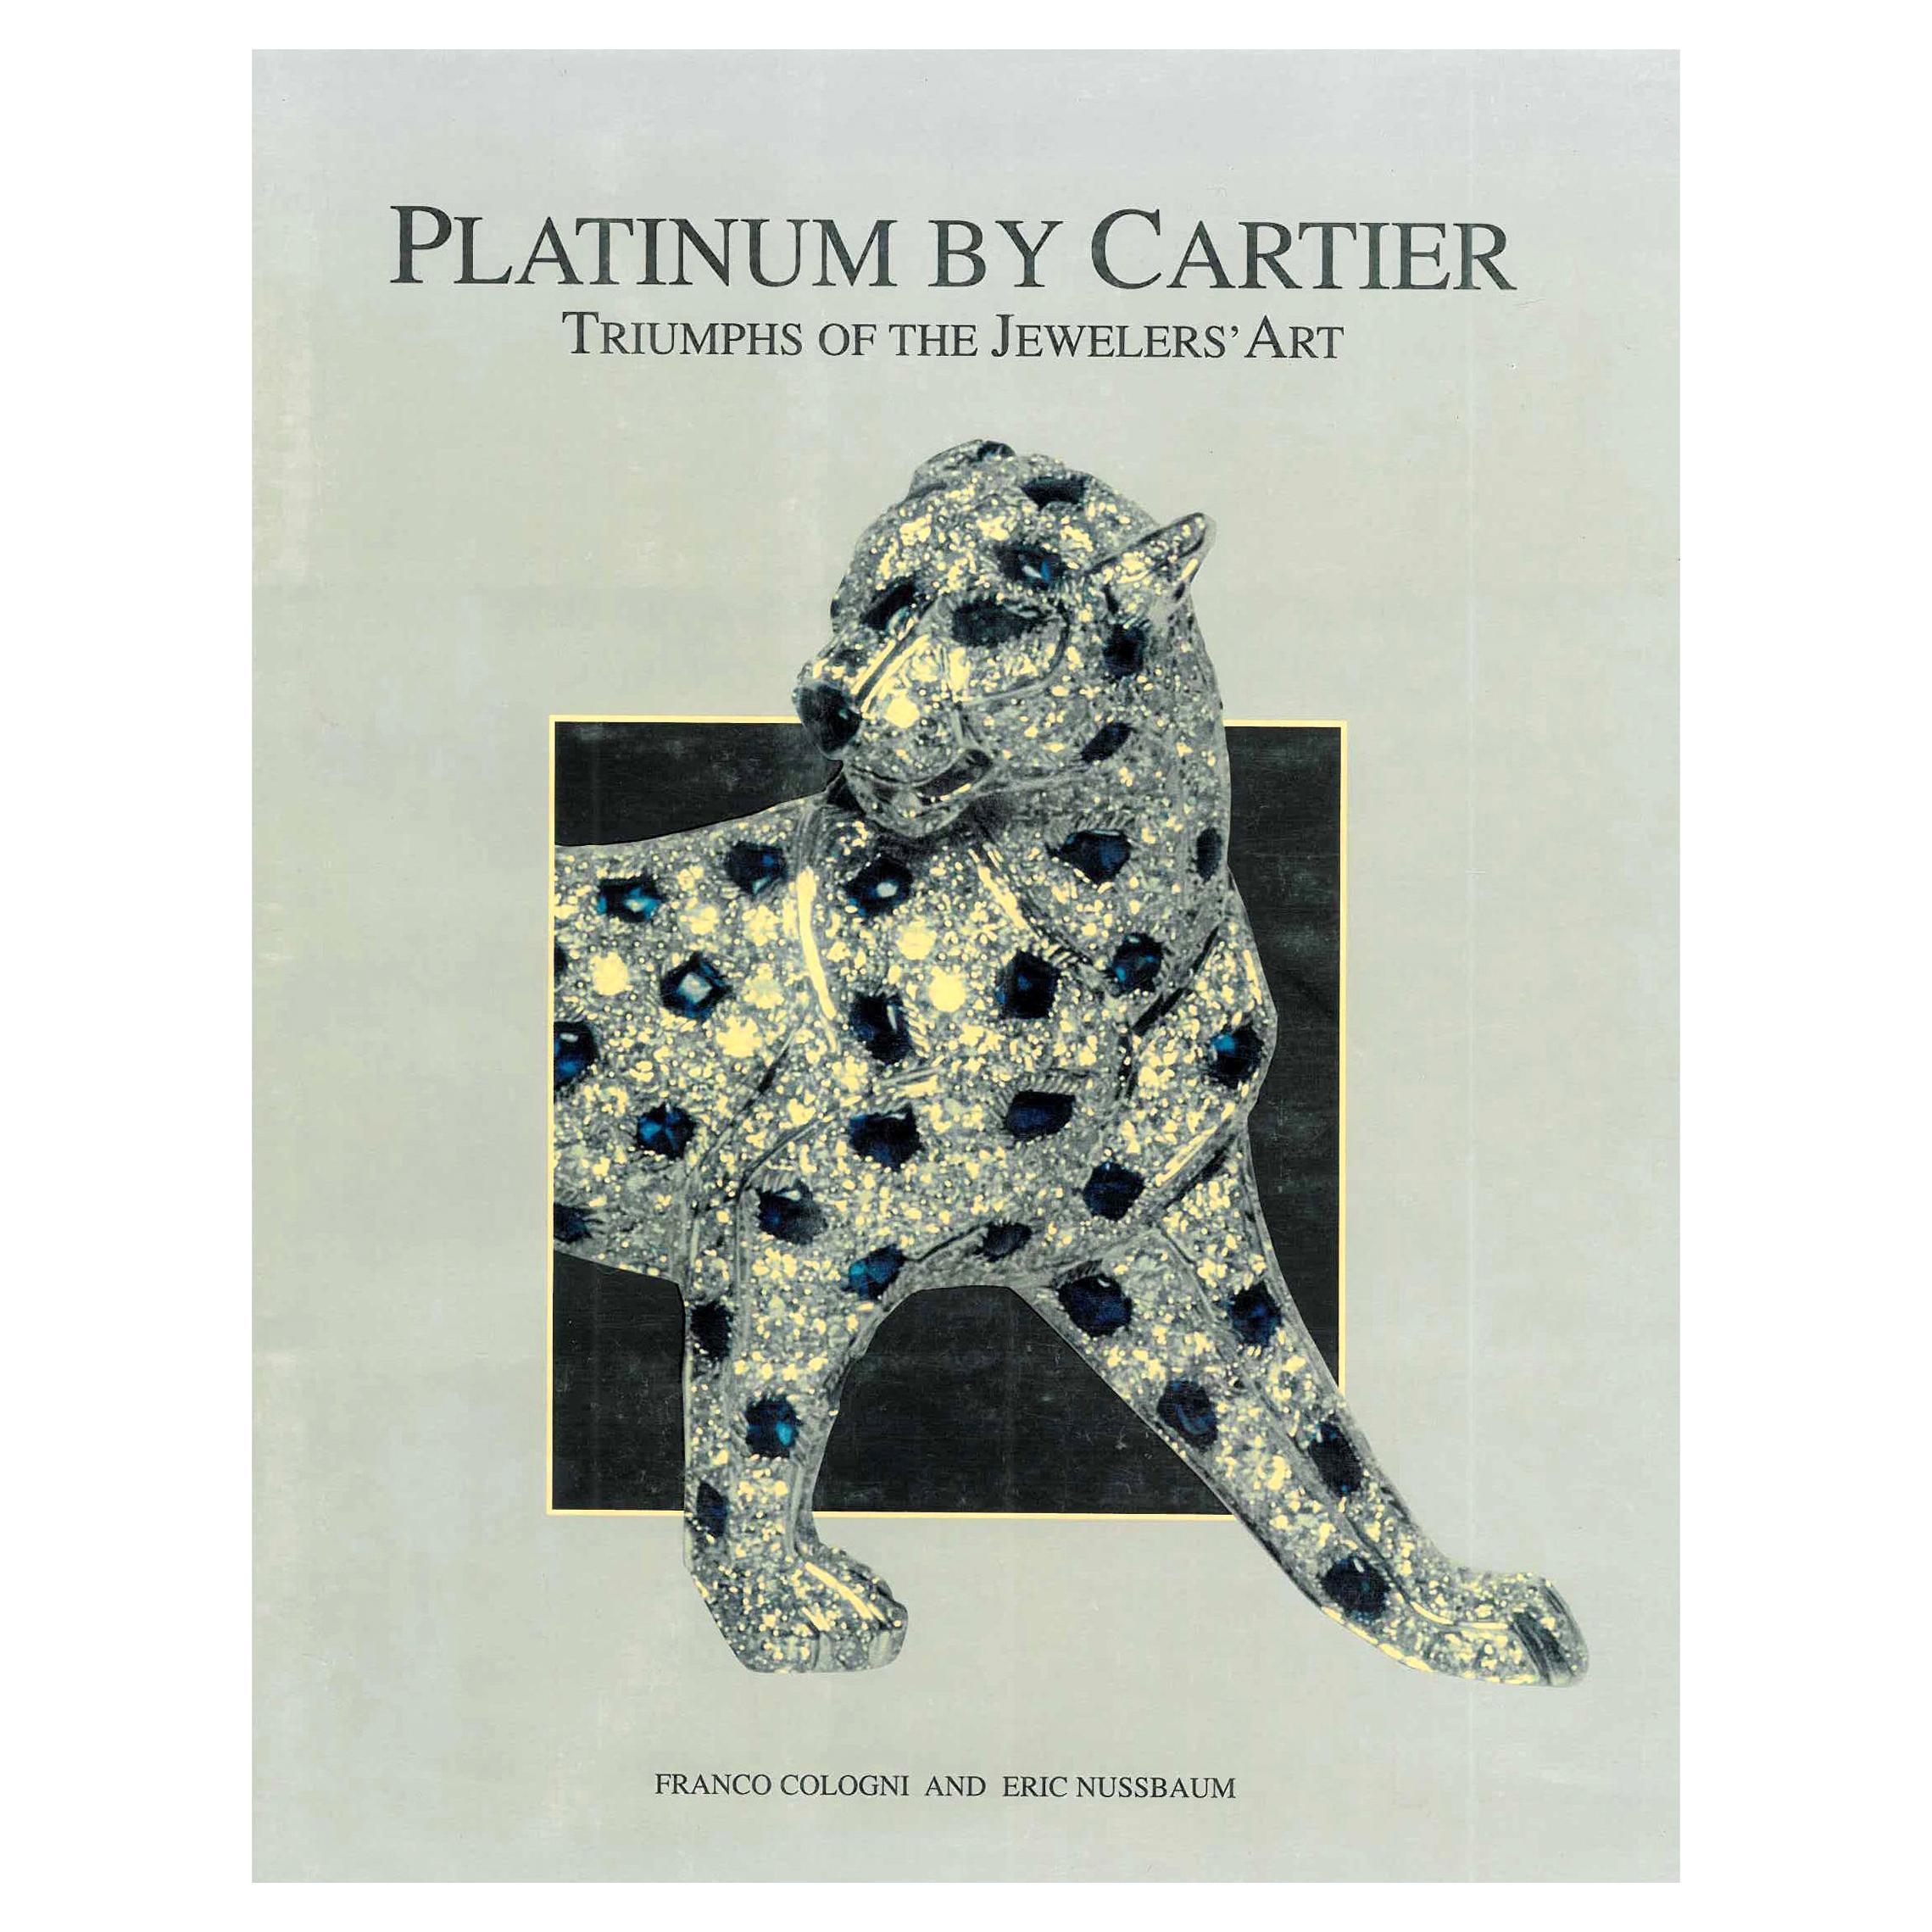 Platinum by Cartier: Triumph of the Jewelers Art (Book)